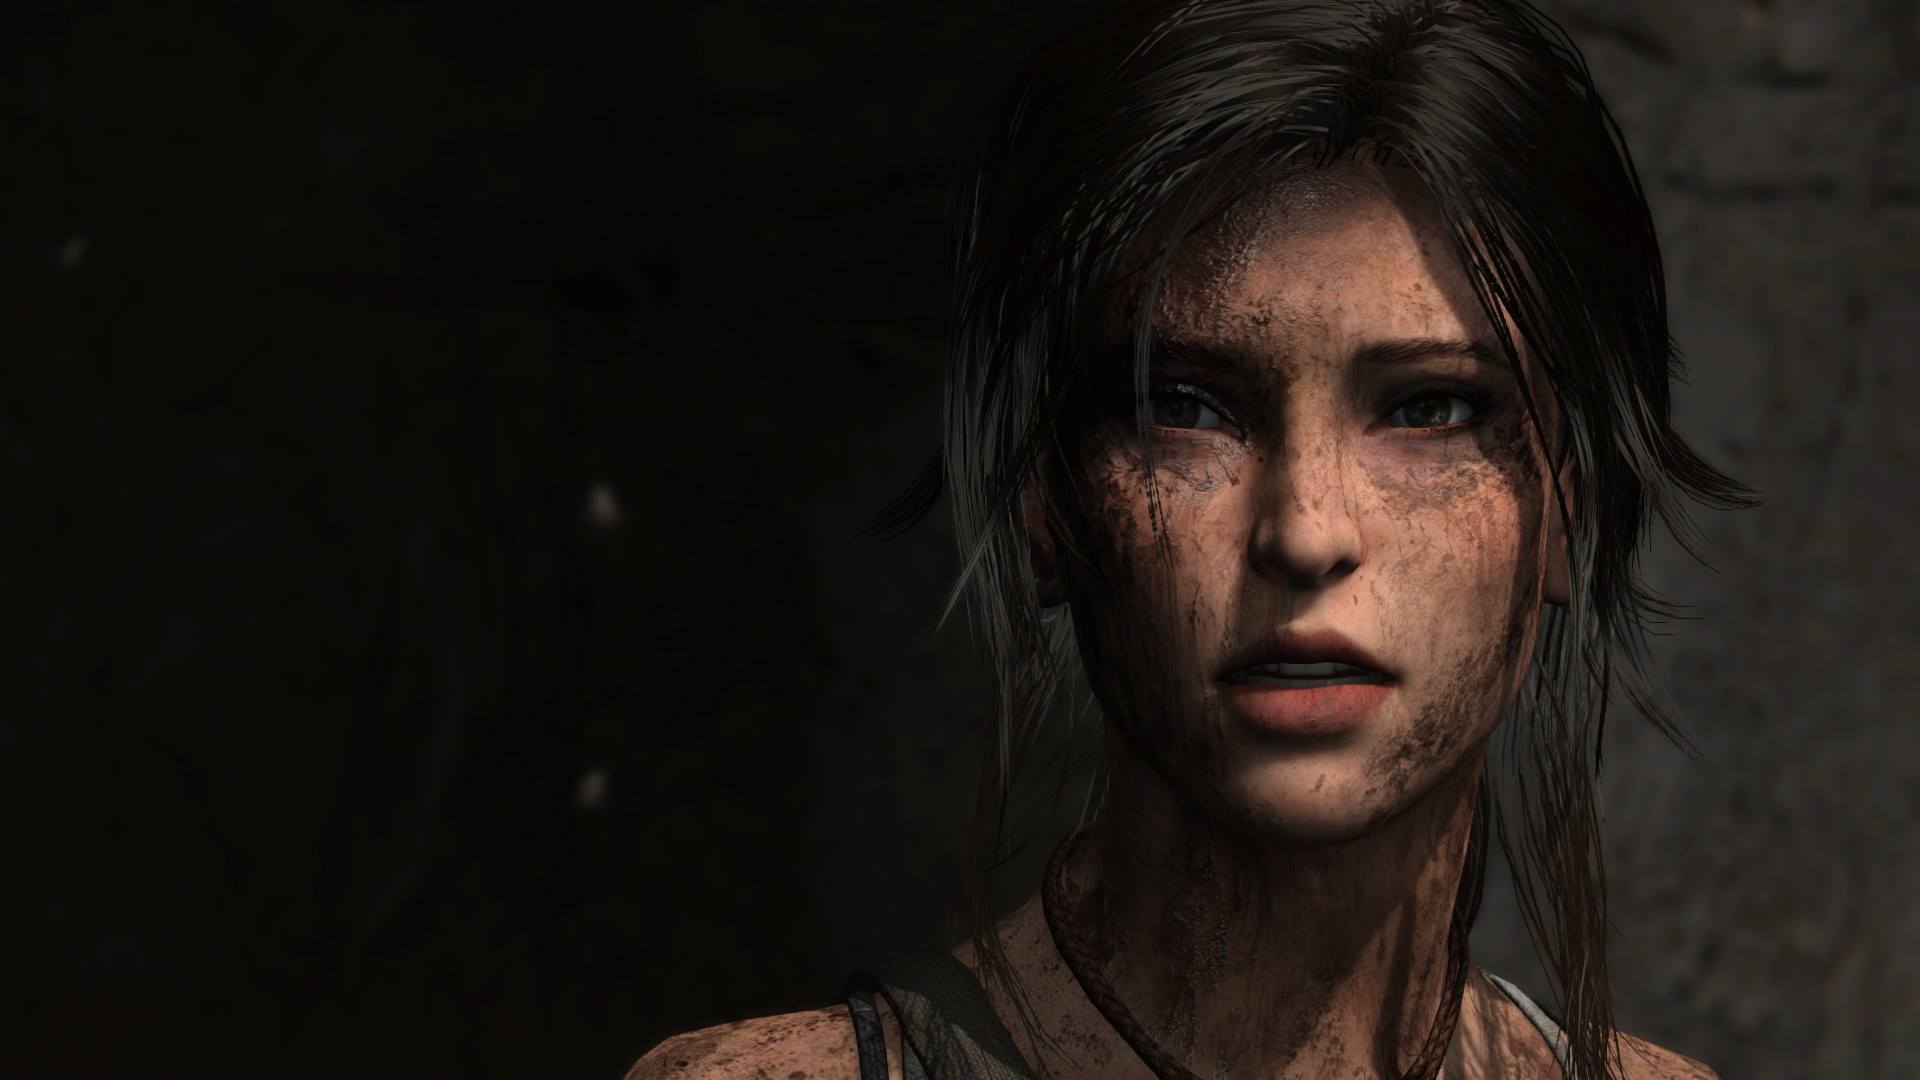 New Tomb Raider Game: Rise of The Tomb Raider Announced 2014